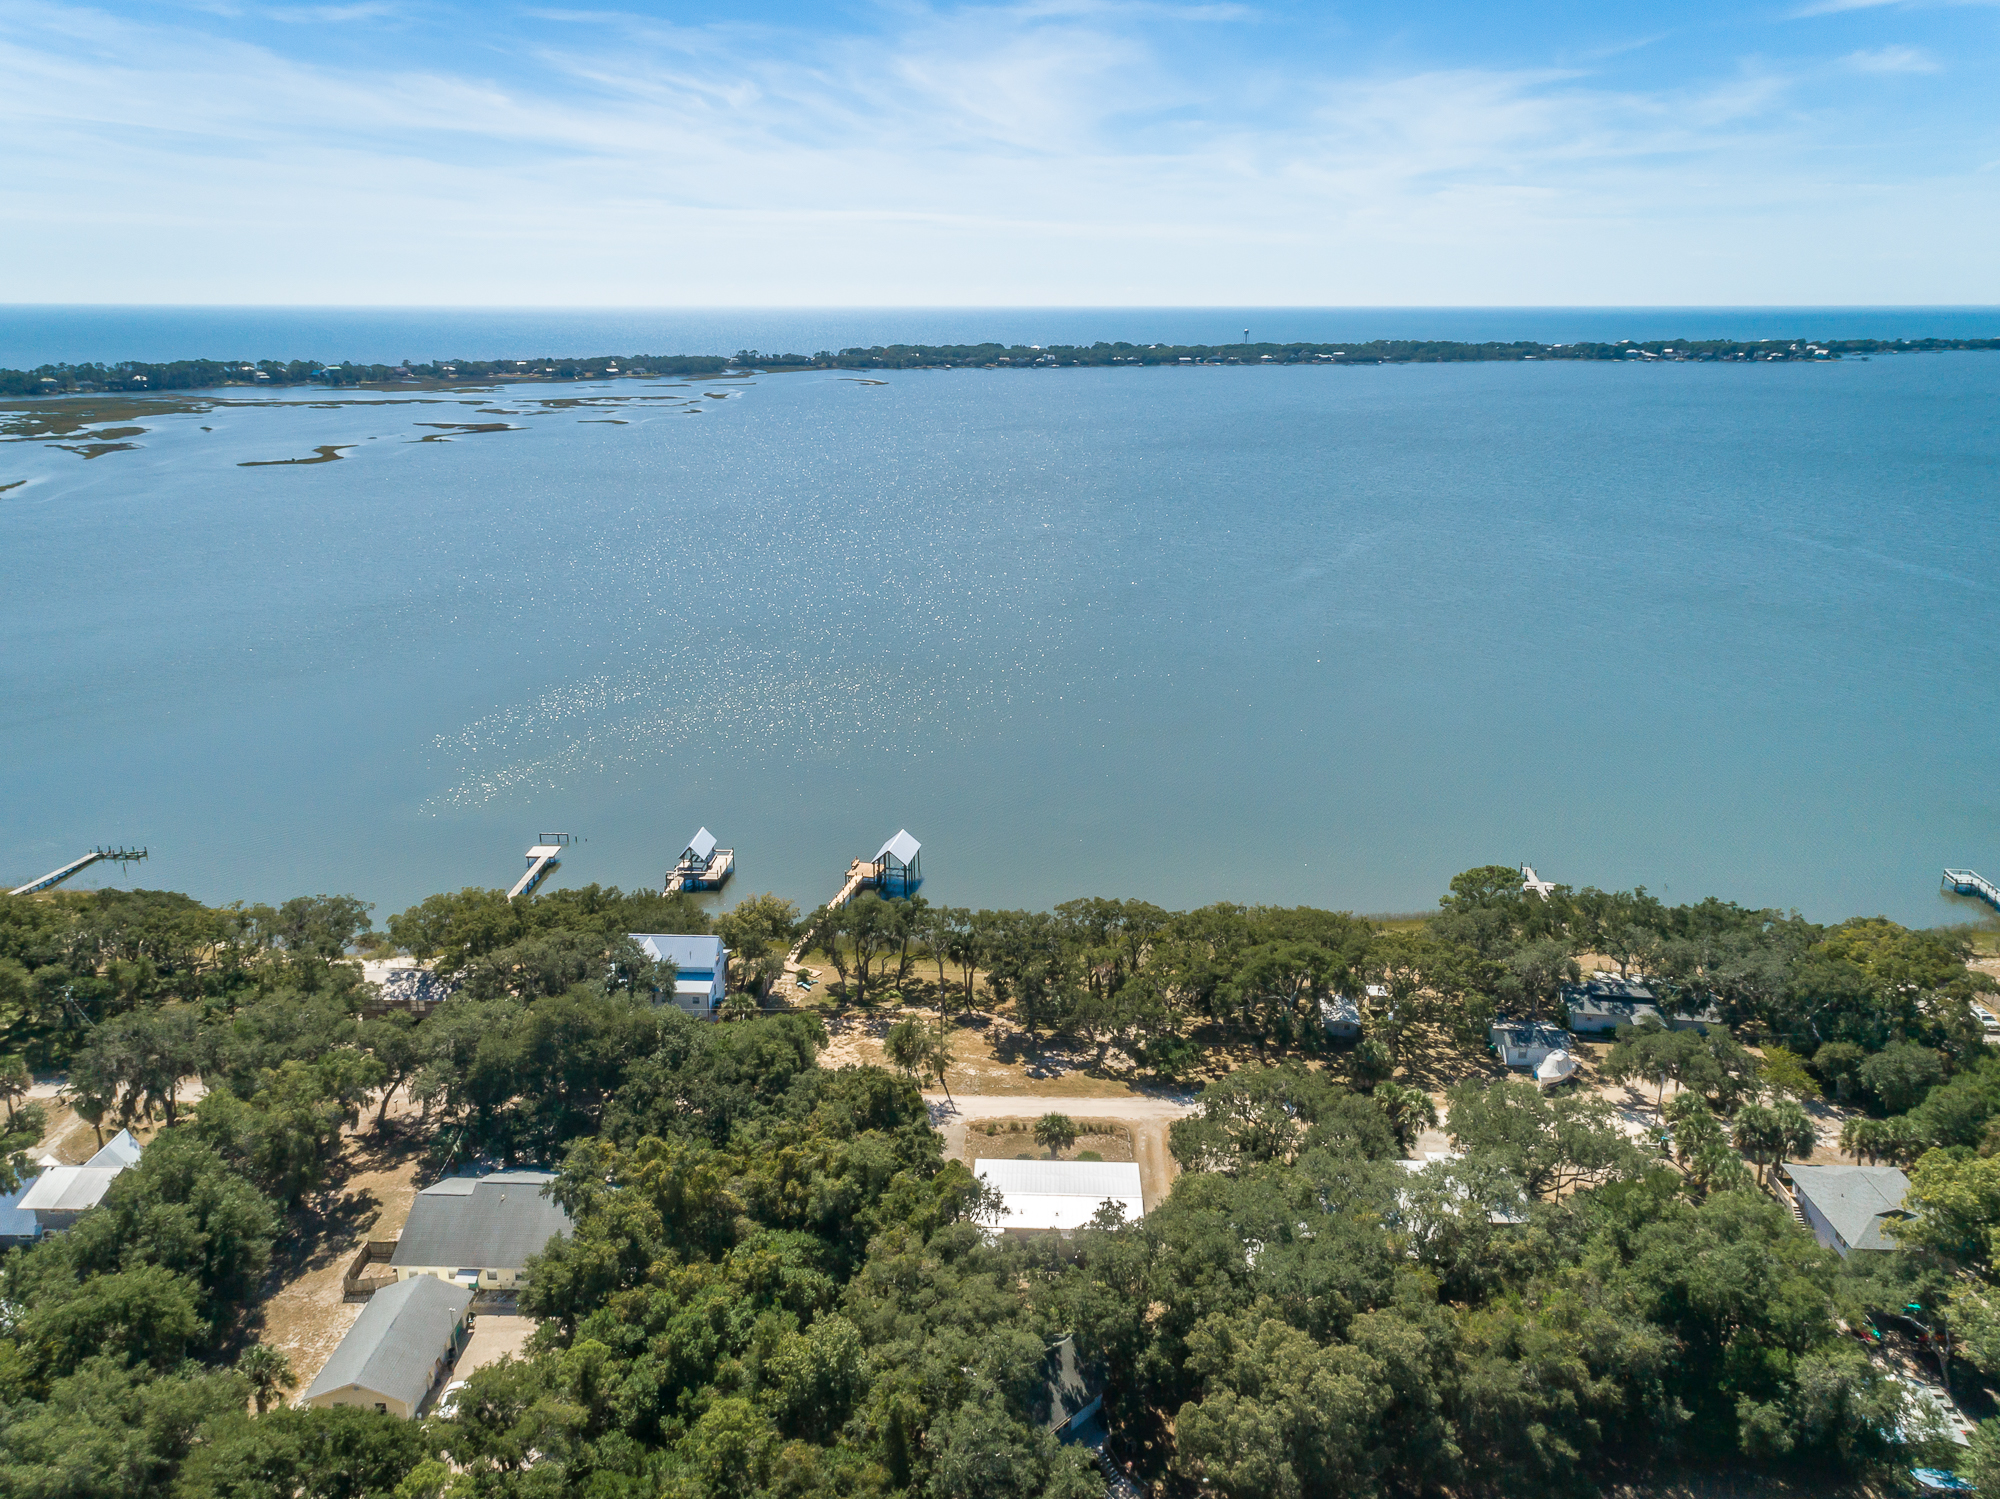 637 Mariner Circle, Alligator Point, FL - New Bay Home For Sale - Next To Public Boat Ramp